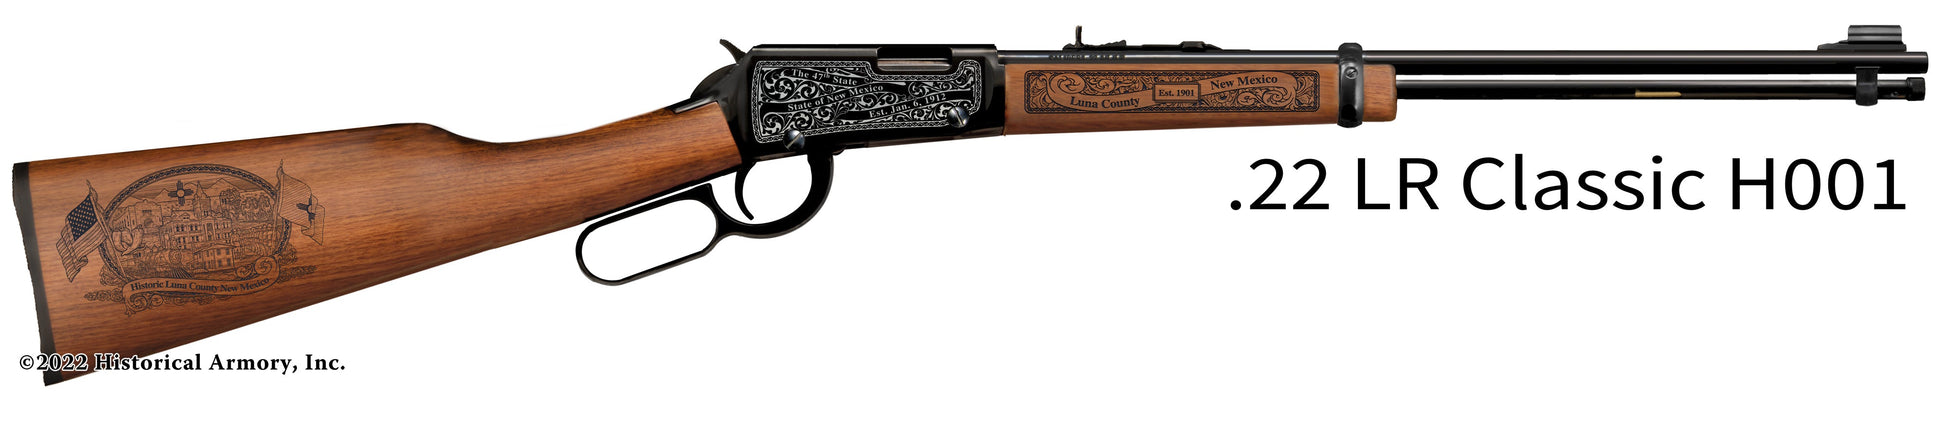 Luna County New Mexico Engraved Henry H001 Rifle